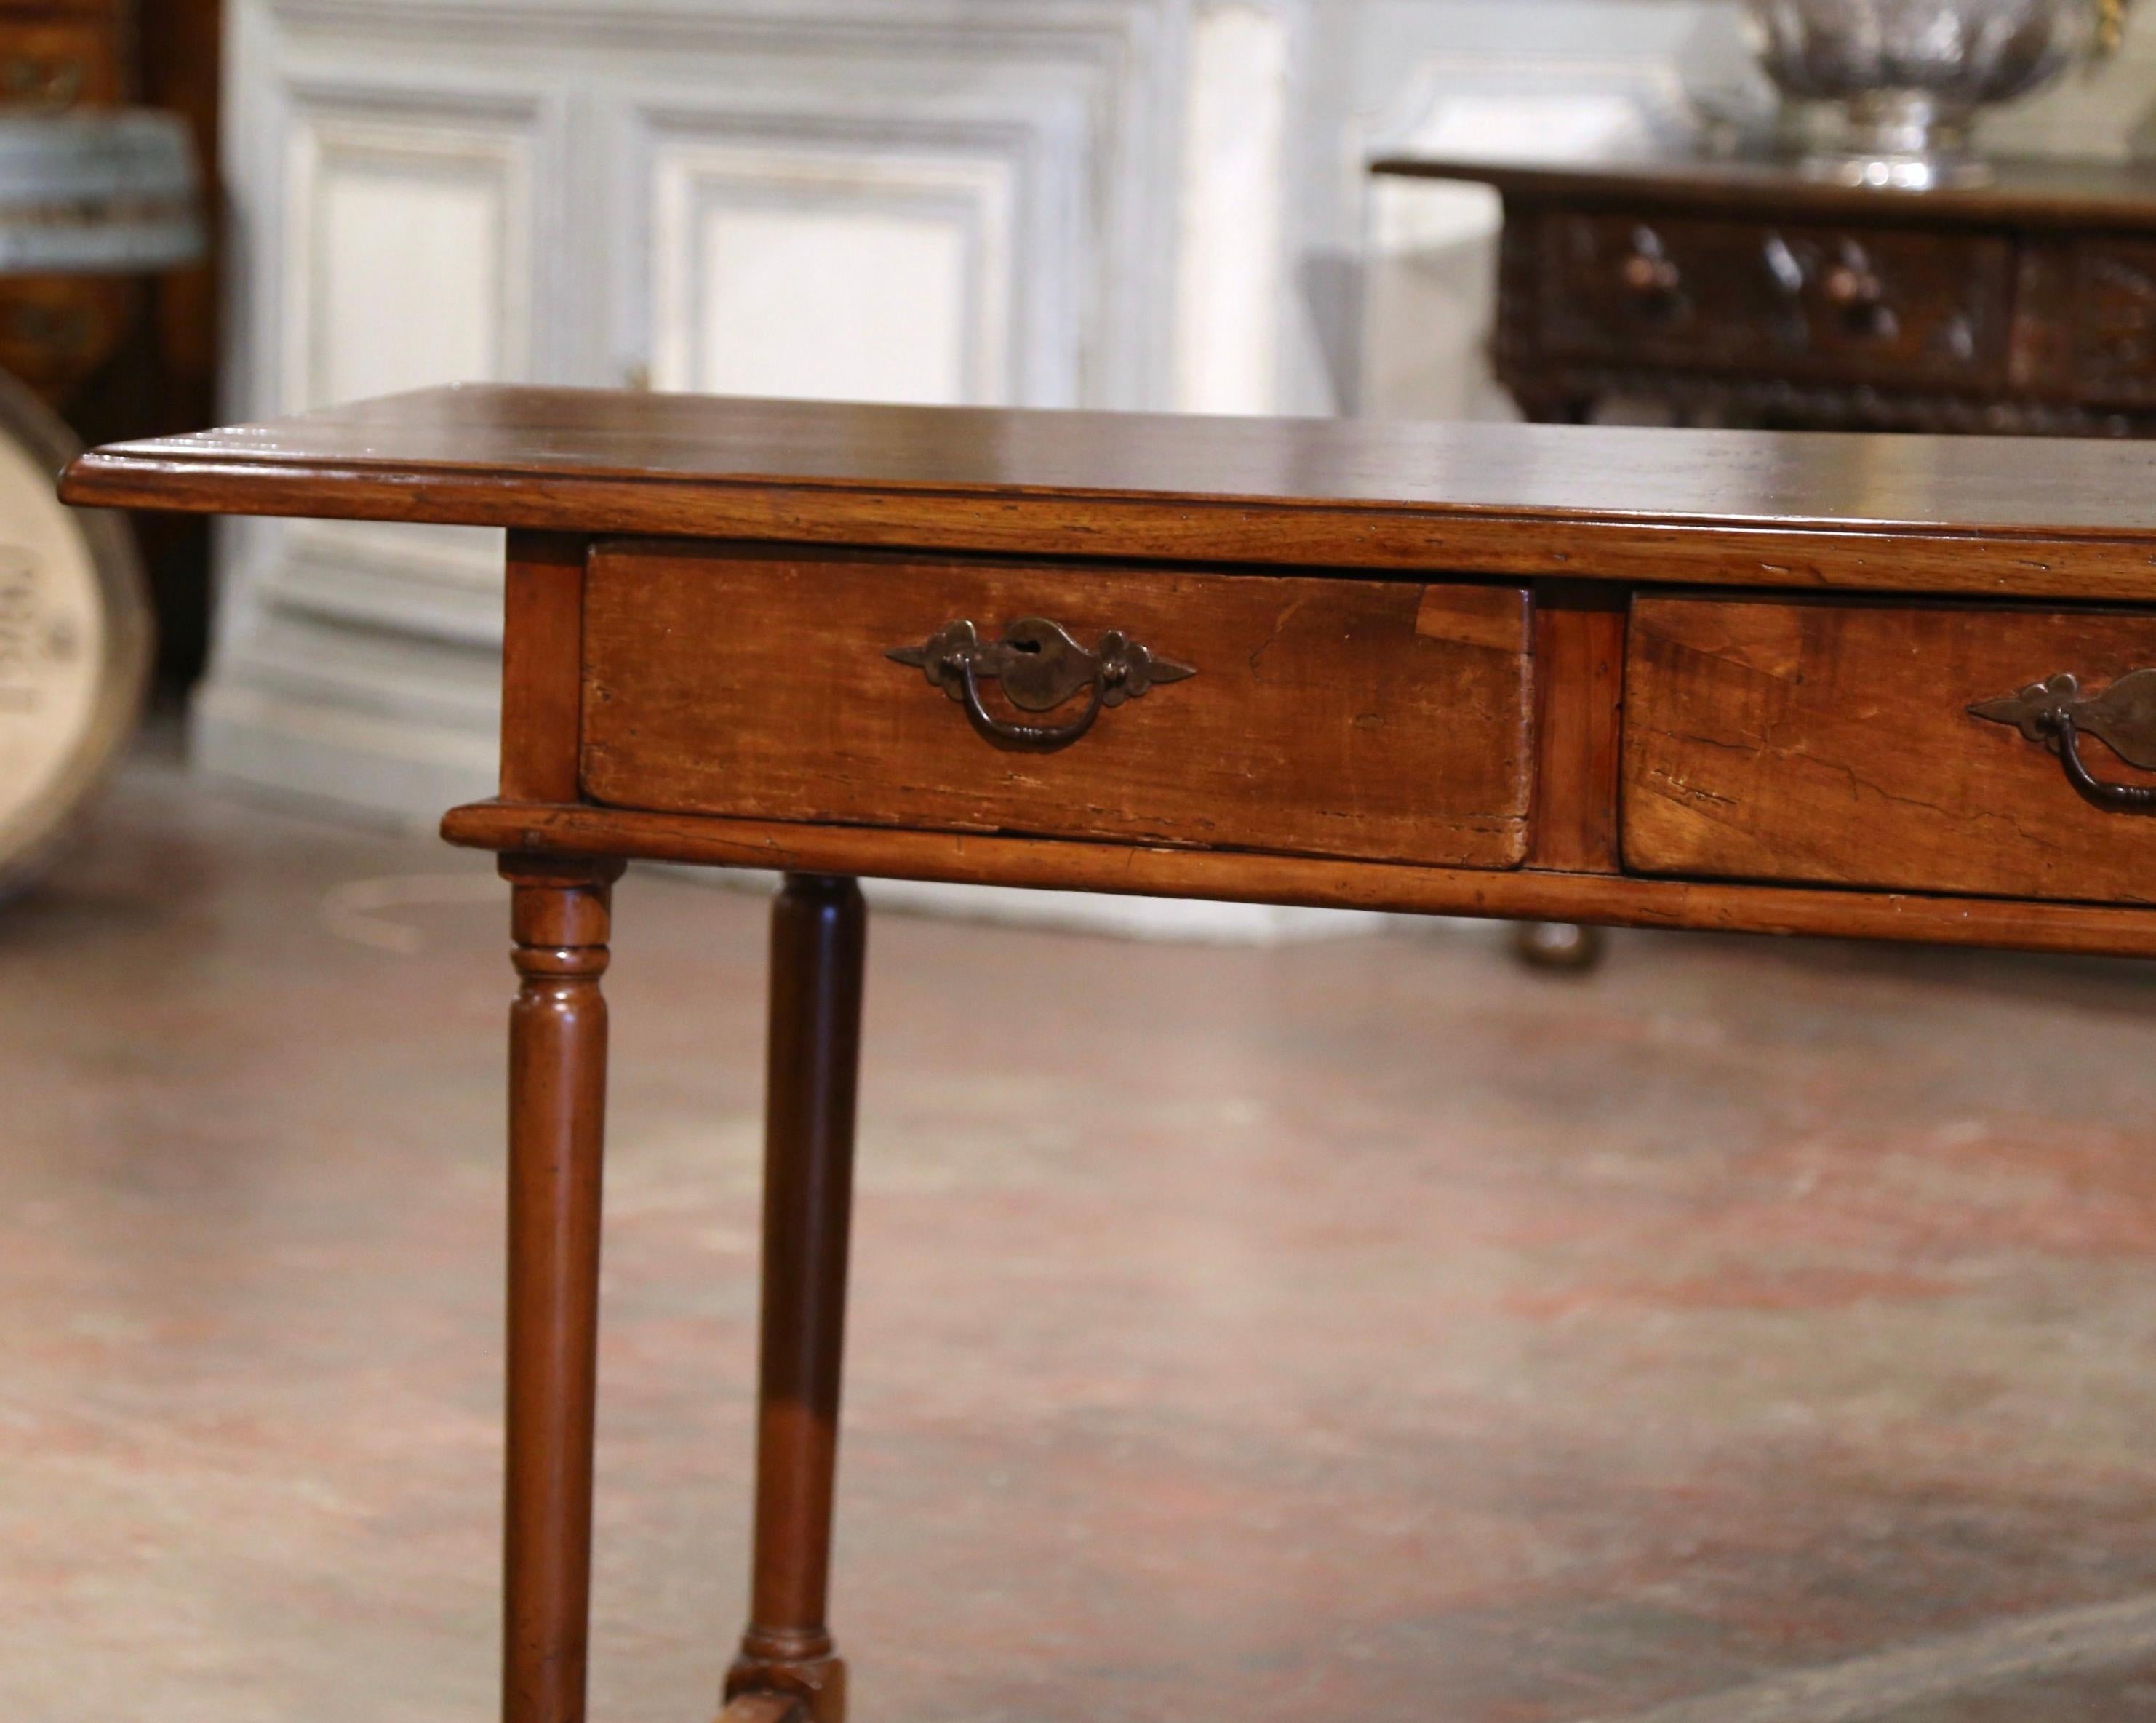 Hand-Carved Mid-19th Century French Empire Walnut Console Table with Drawers For Sale